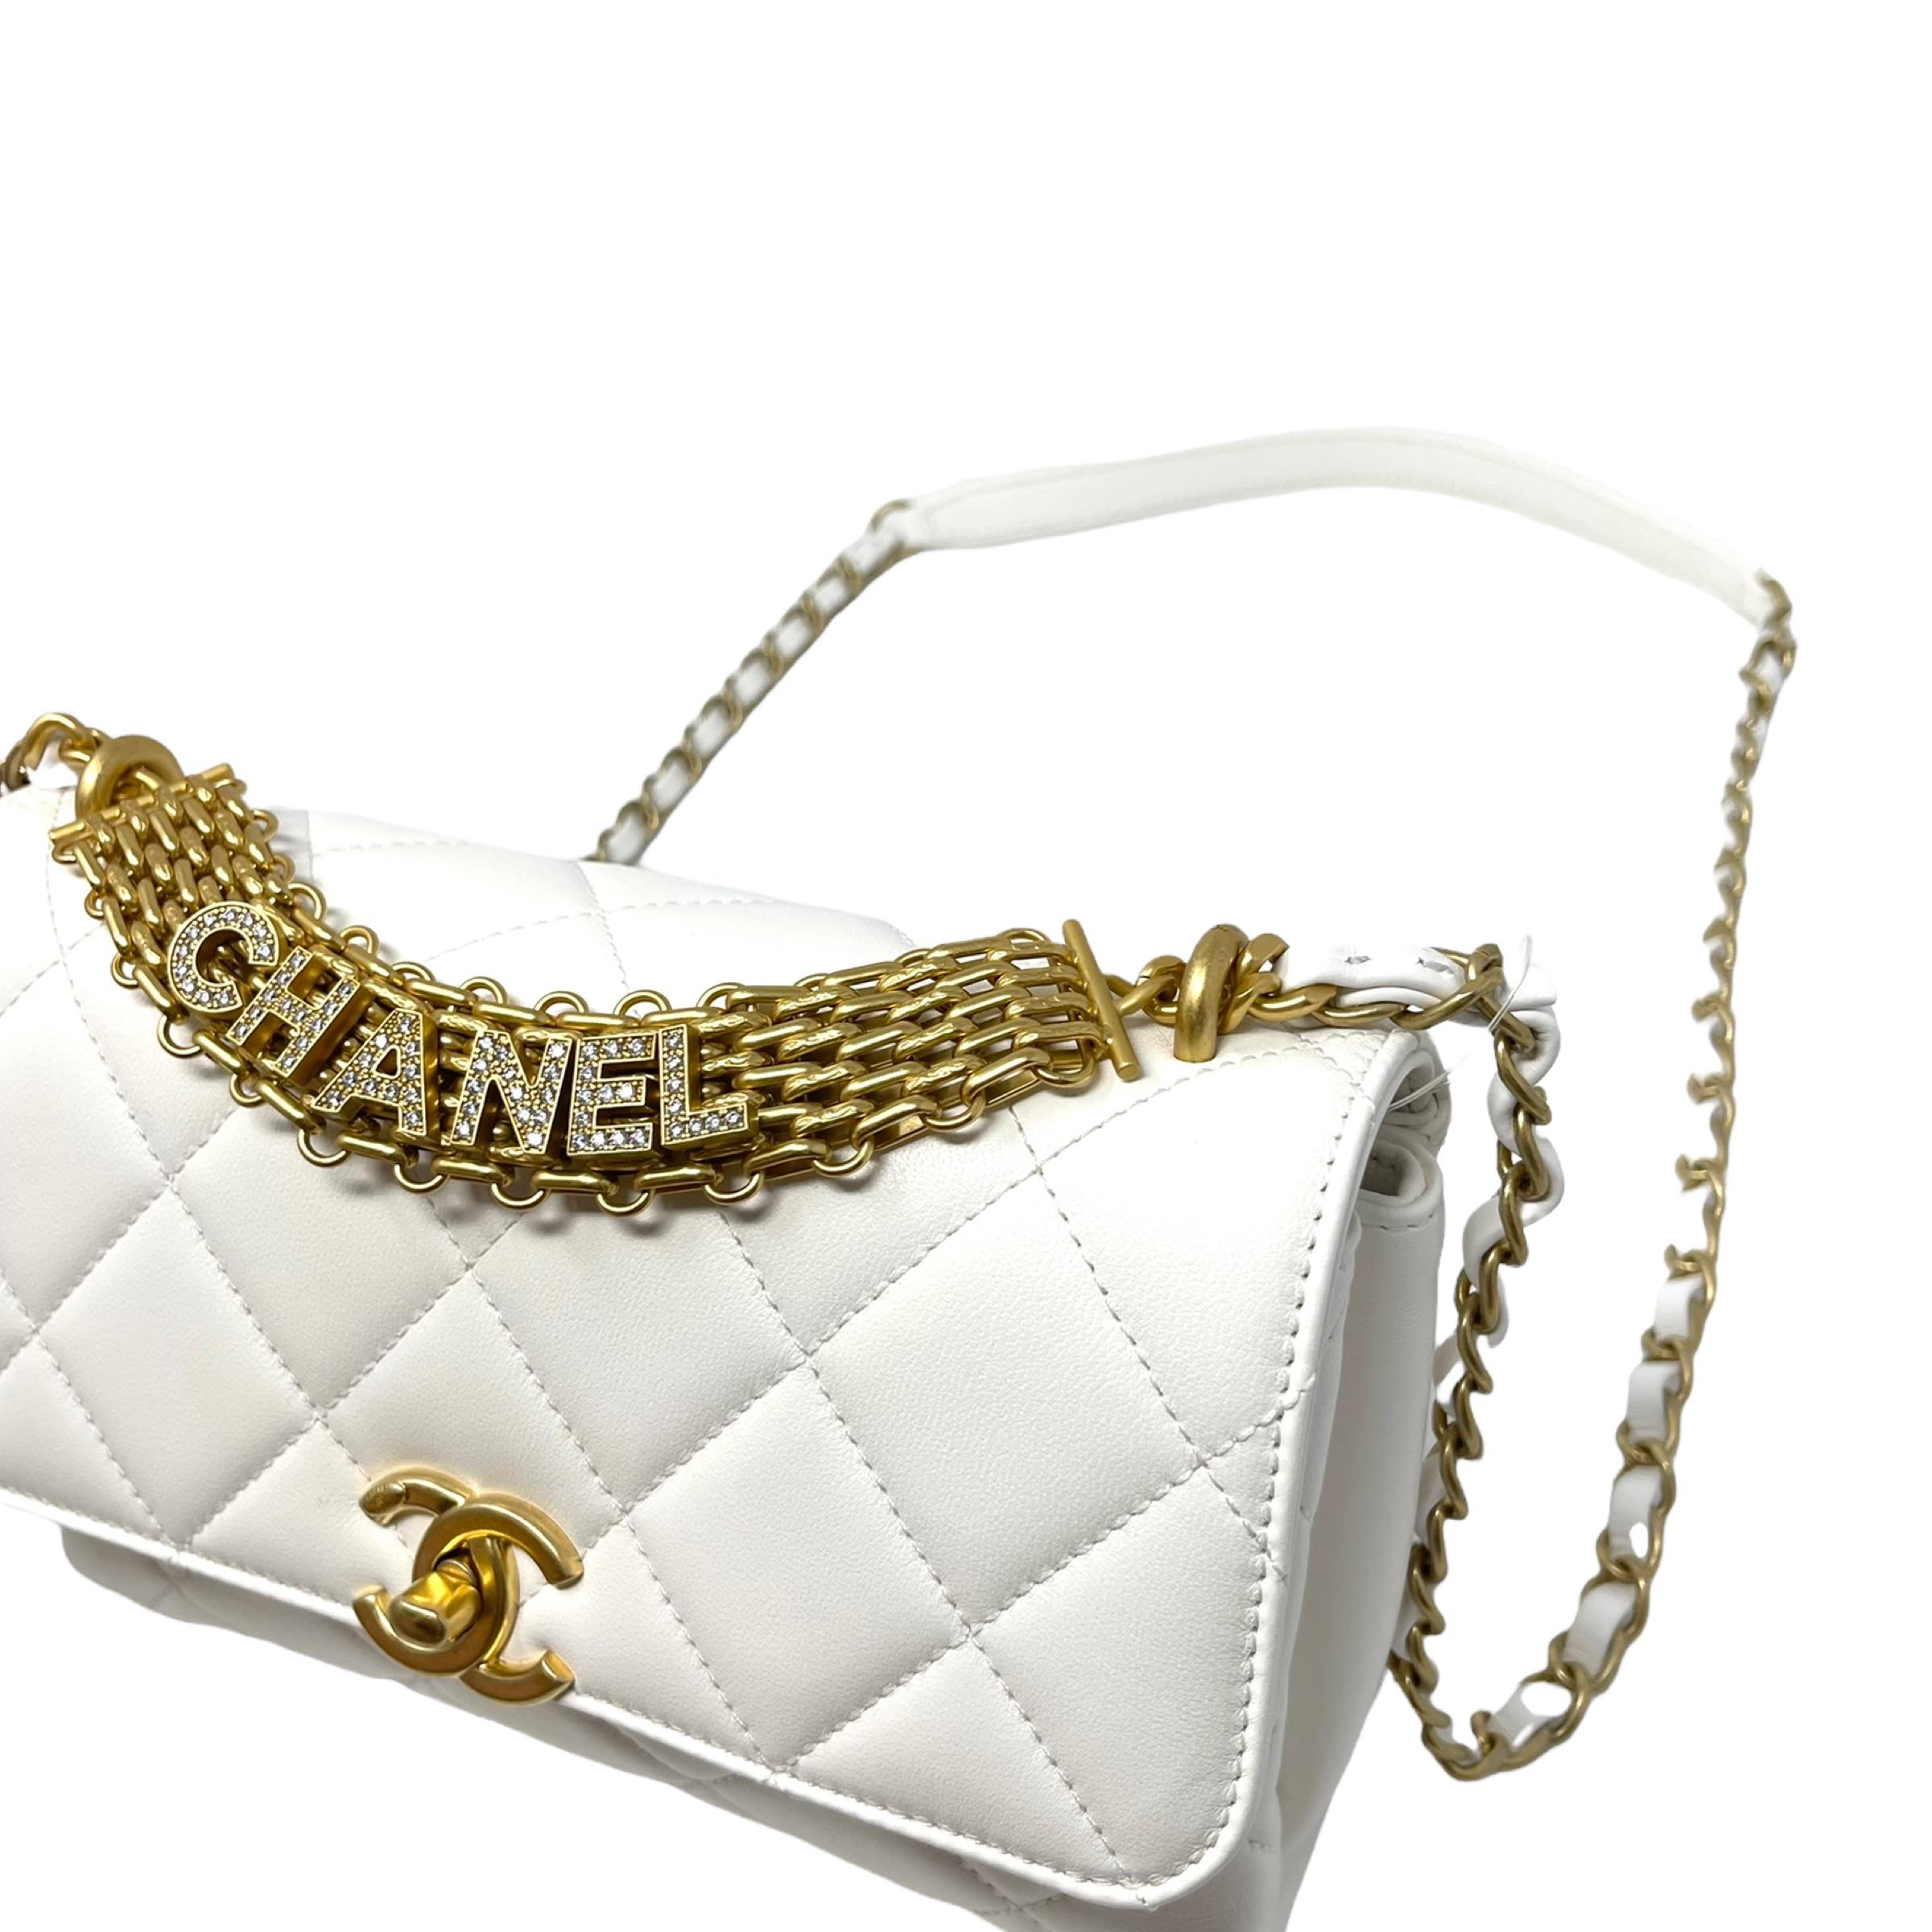 NEW Chanel White Small Flap Bag Quilted Leather Crossbody Bag For Sale 9